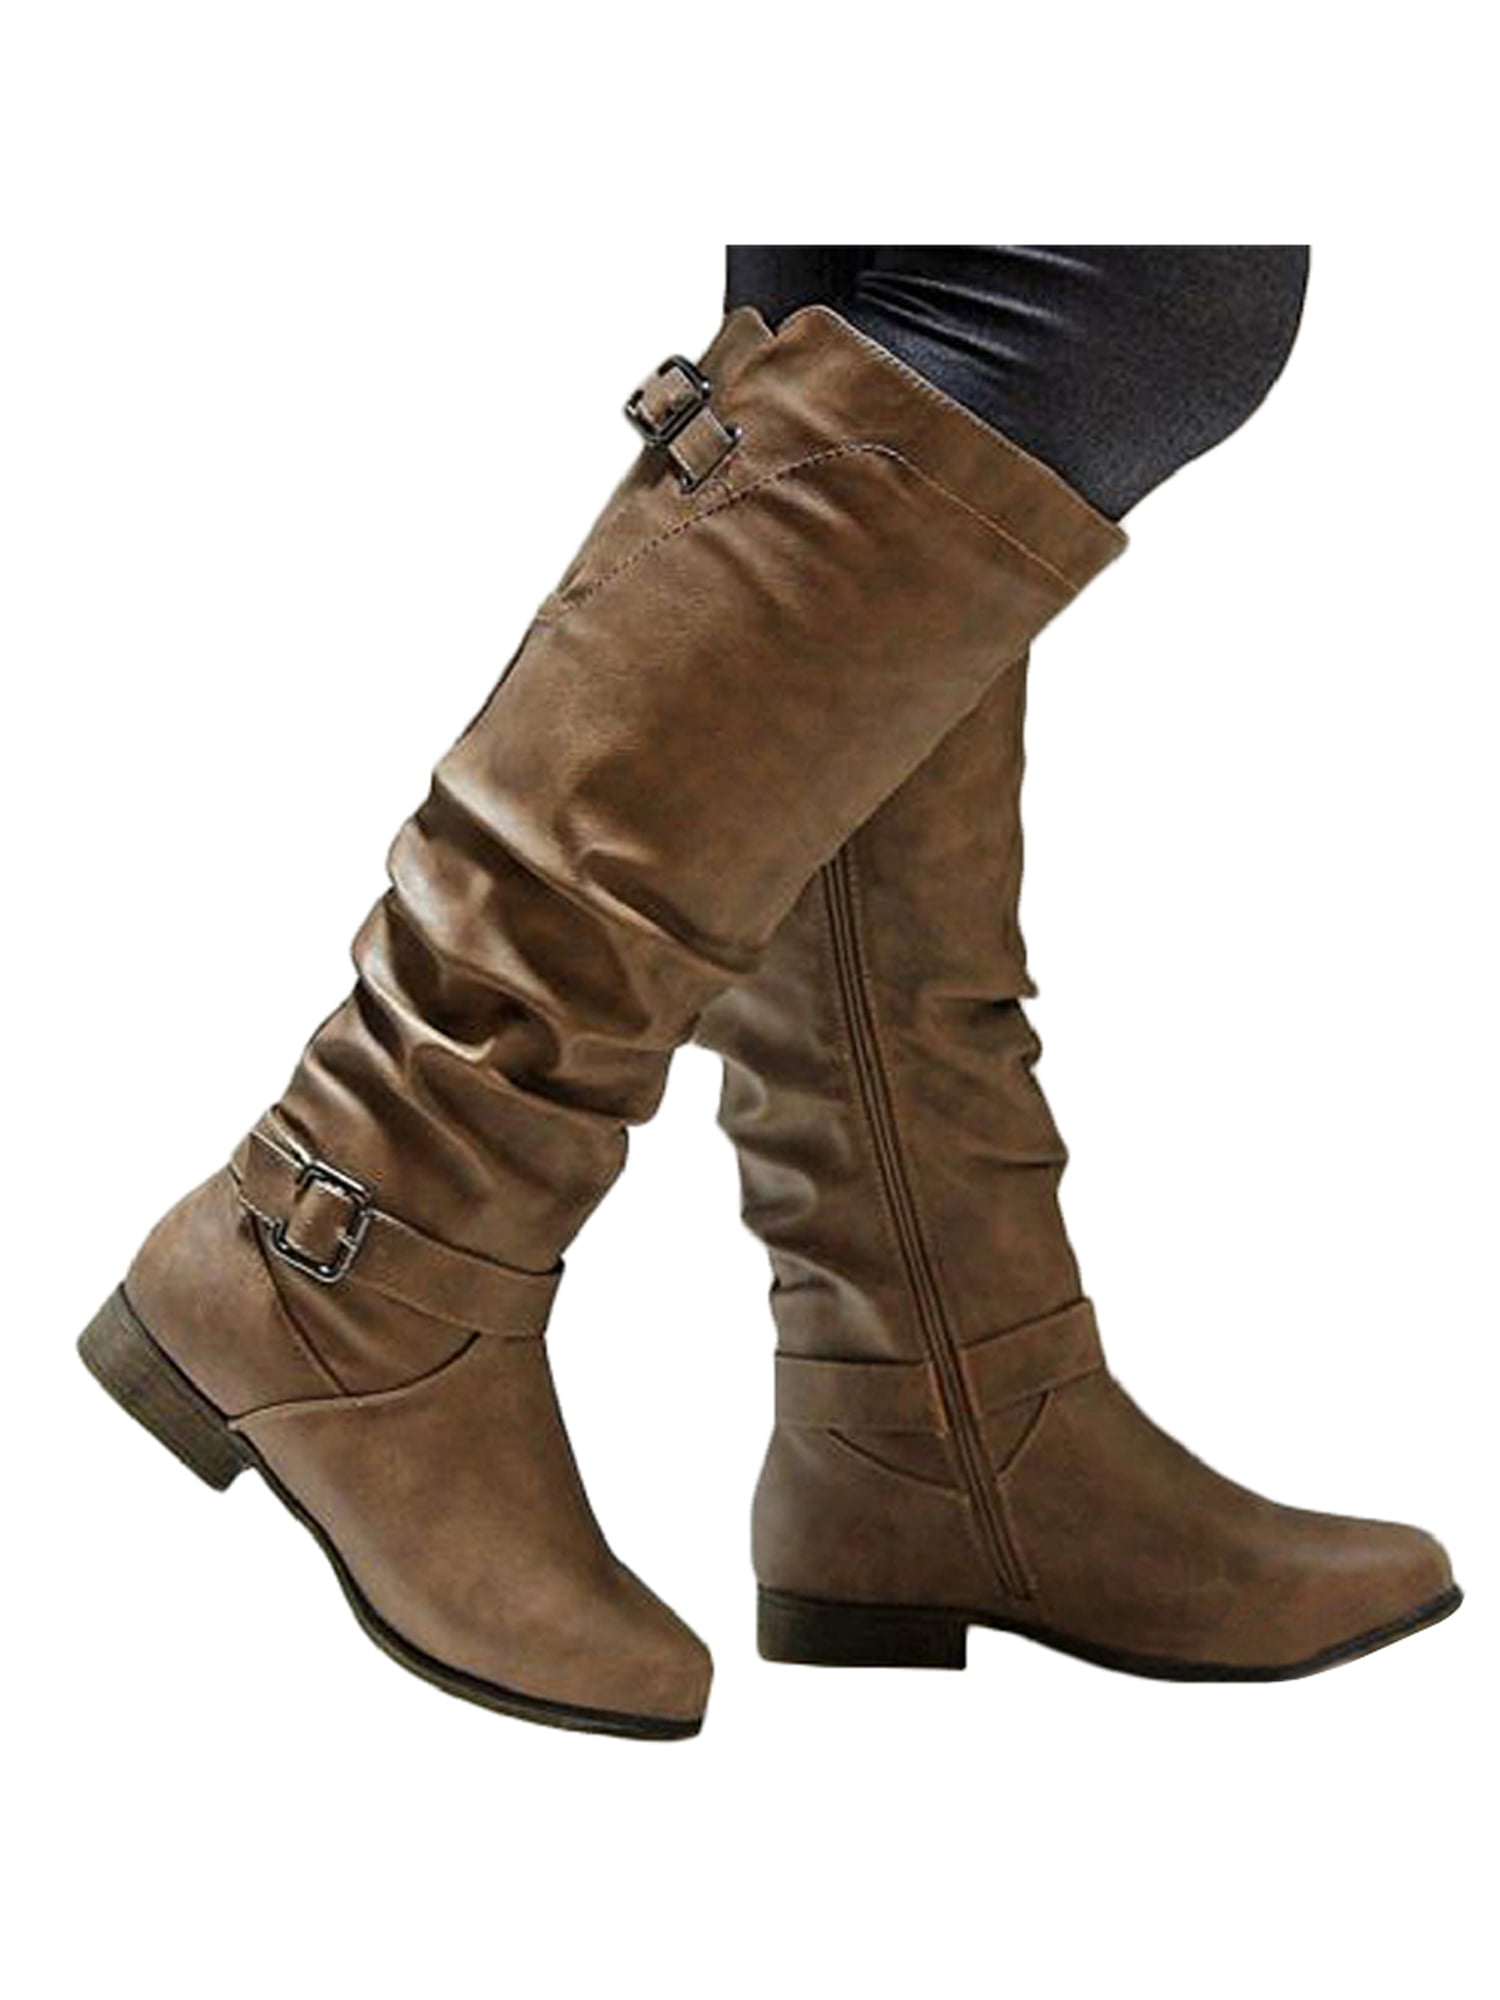 Women PU Leather Round Toe Mid Calf Boots Buckle Riding Knee High Boots Shoes